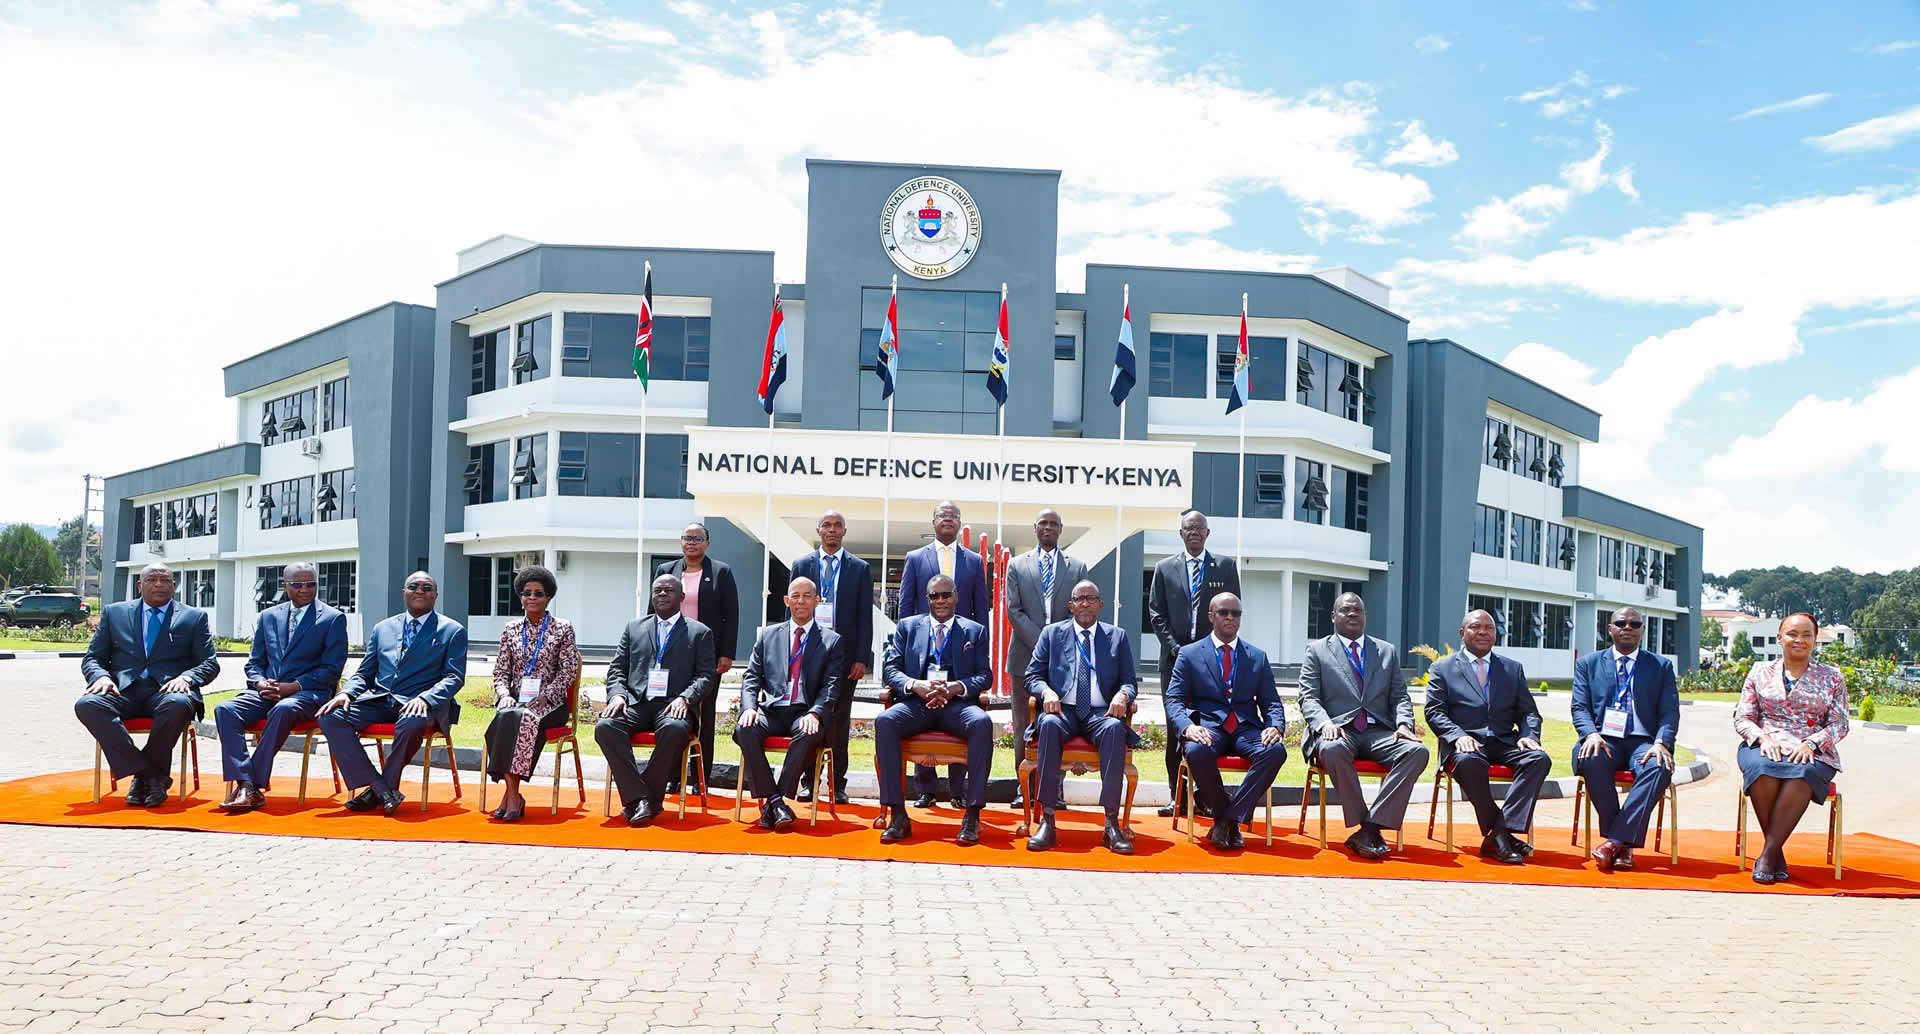 National Defence University-Kenya Hosts Its First National Cyber-Security Symposium